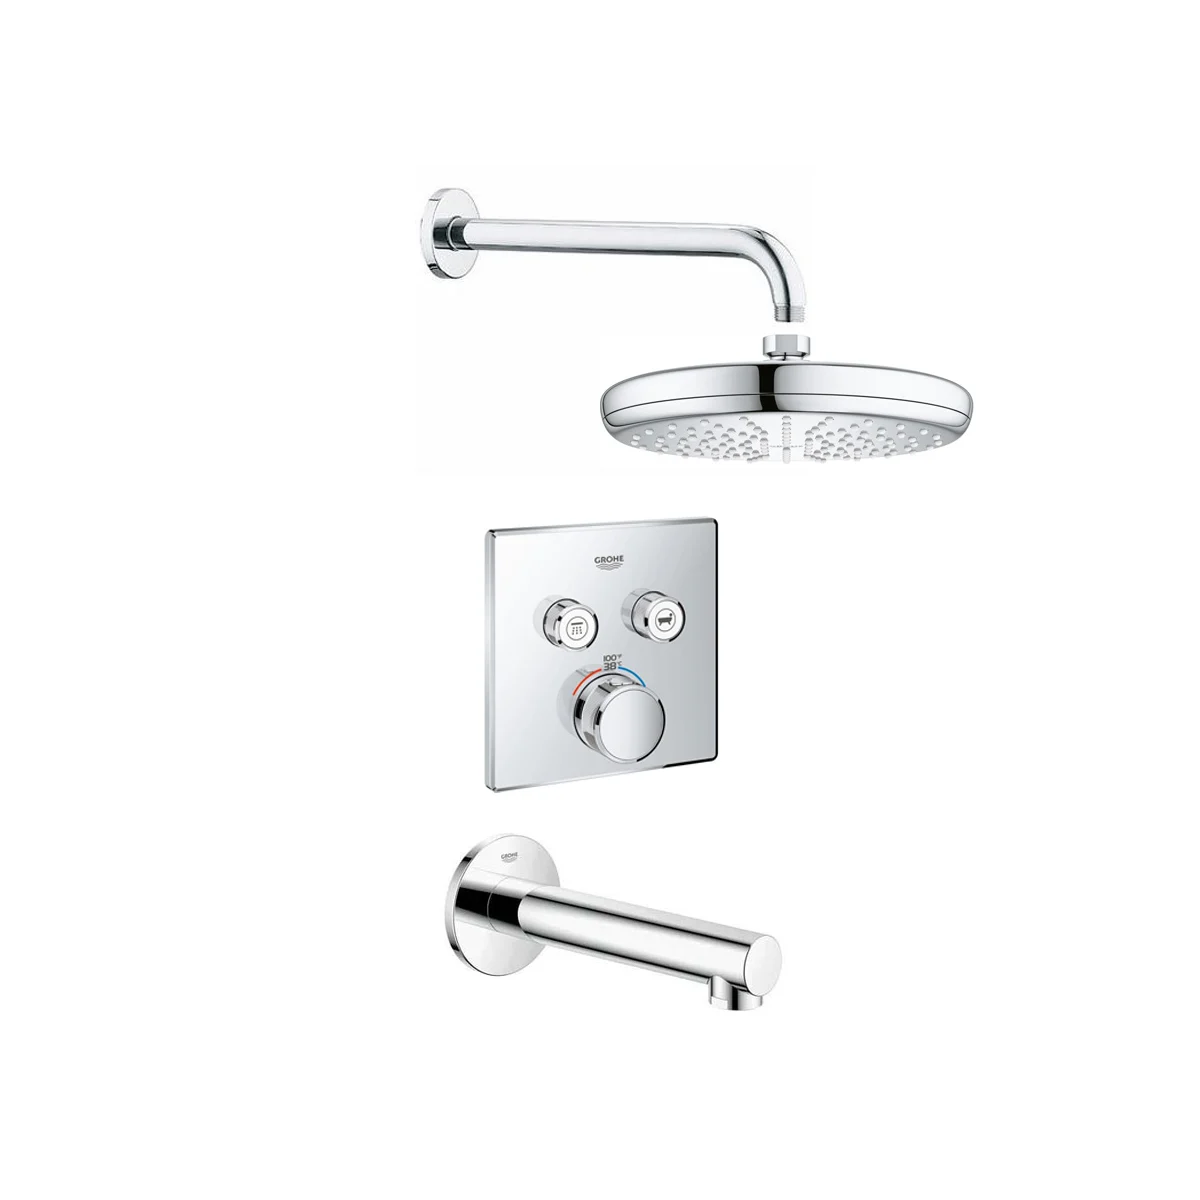 grohe gss grohtherm sq 07 00a 7109186 1 Taps Depot Ltd.